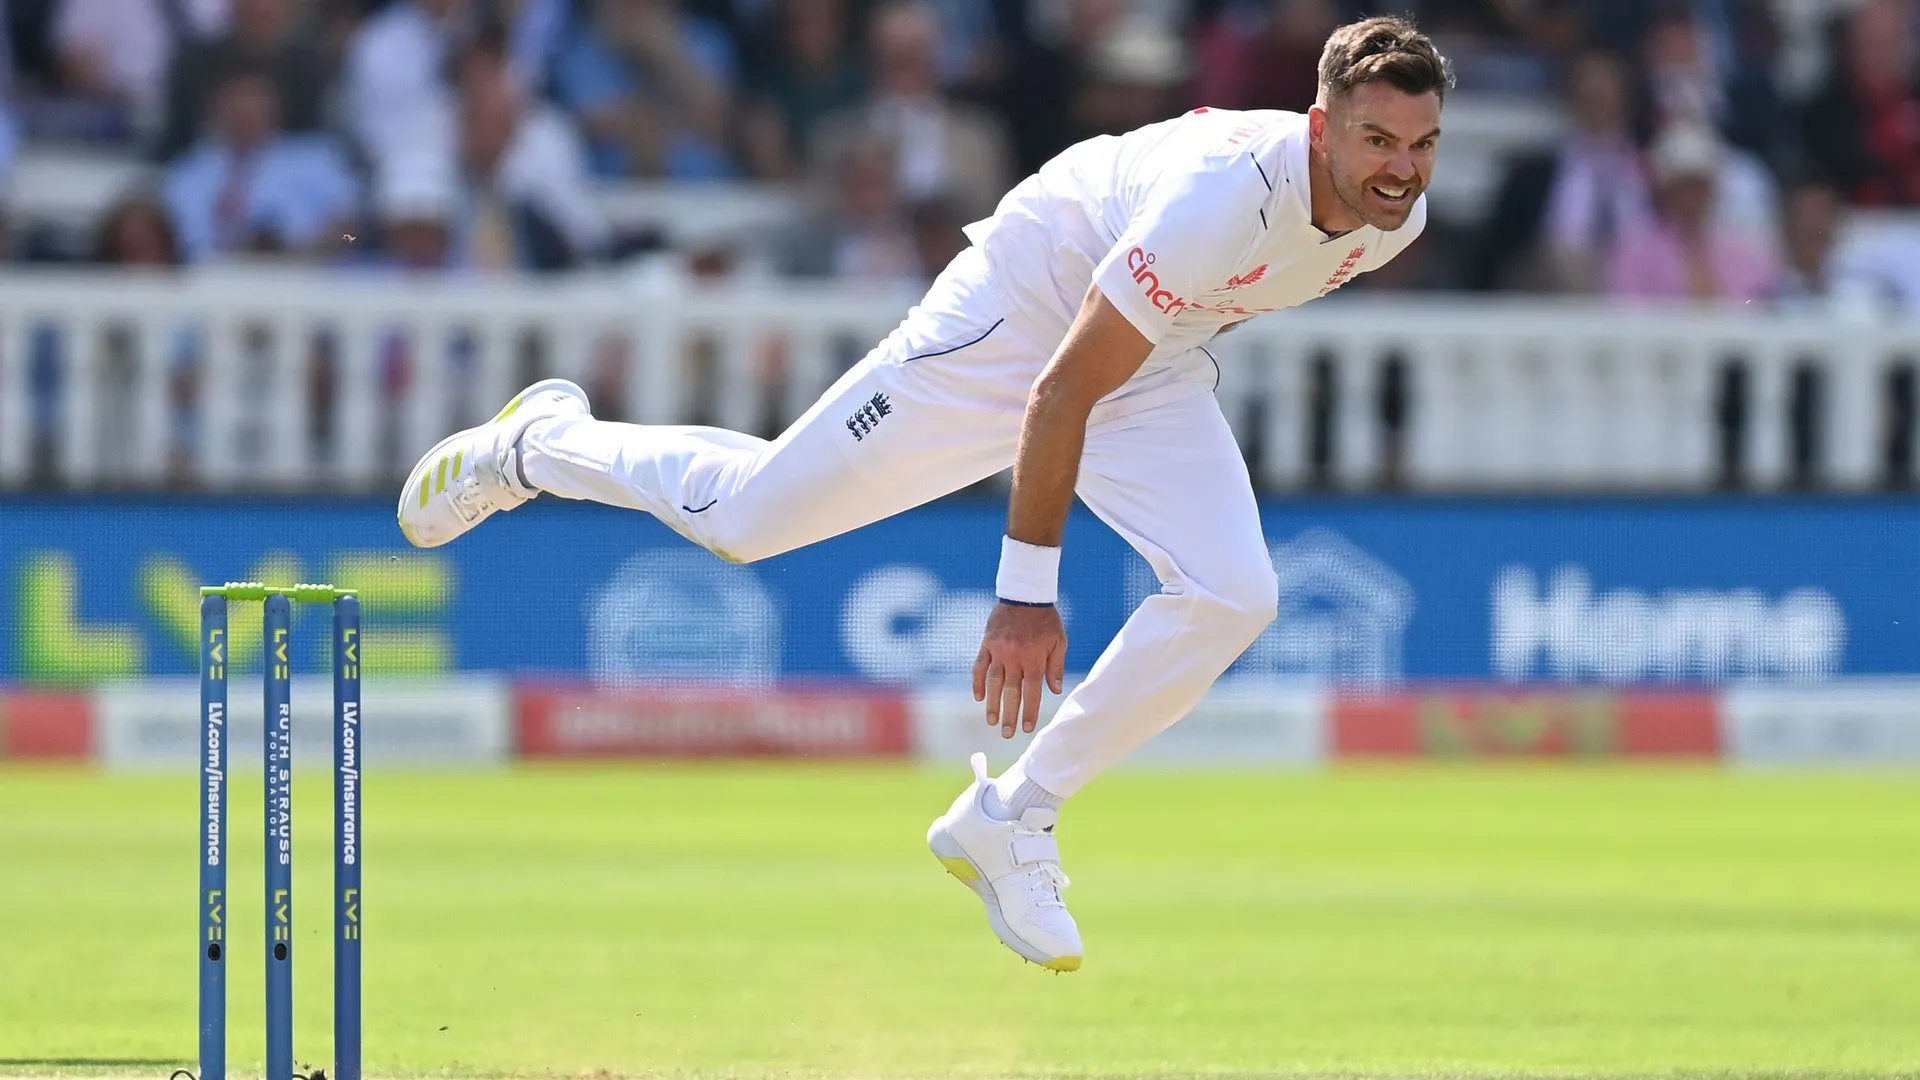 James Anderson: There is so much to love about the longer form